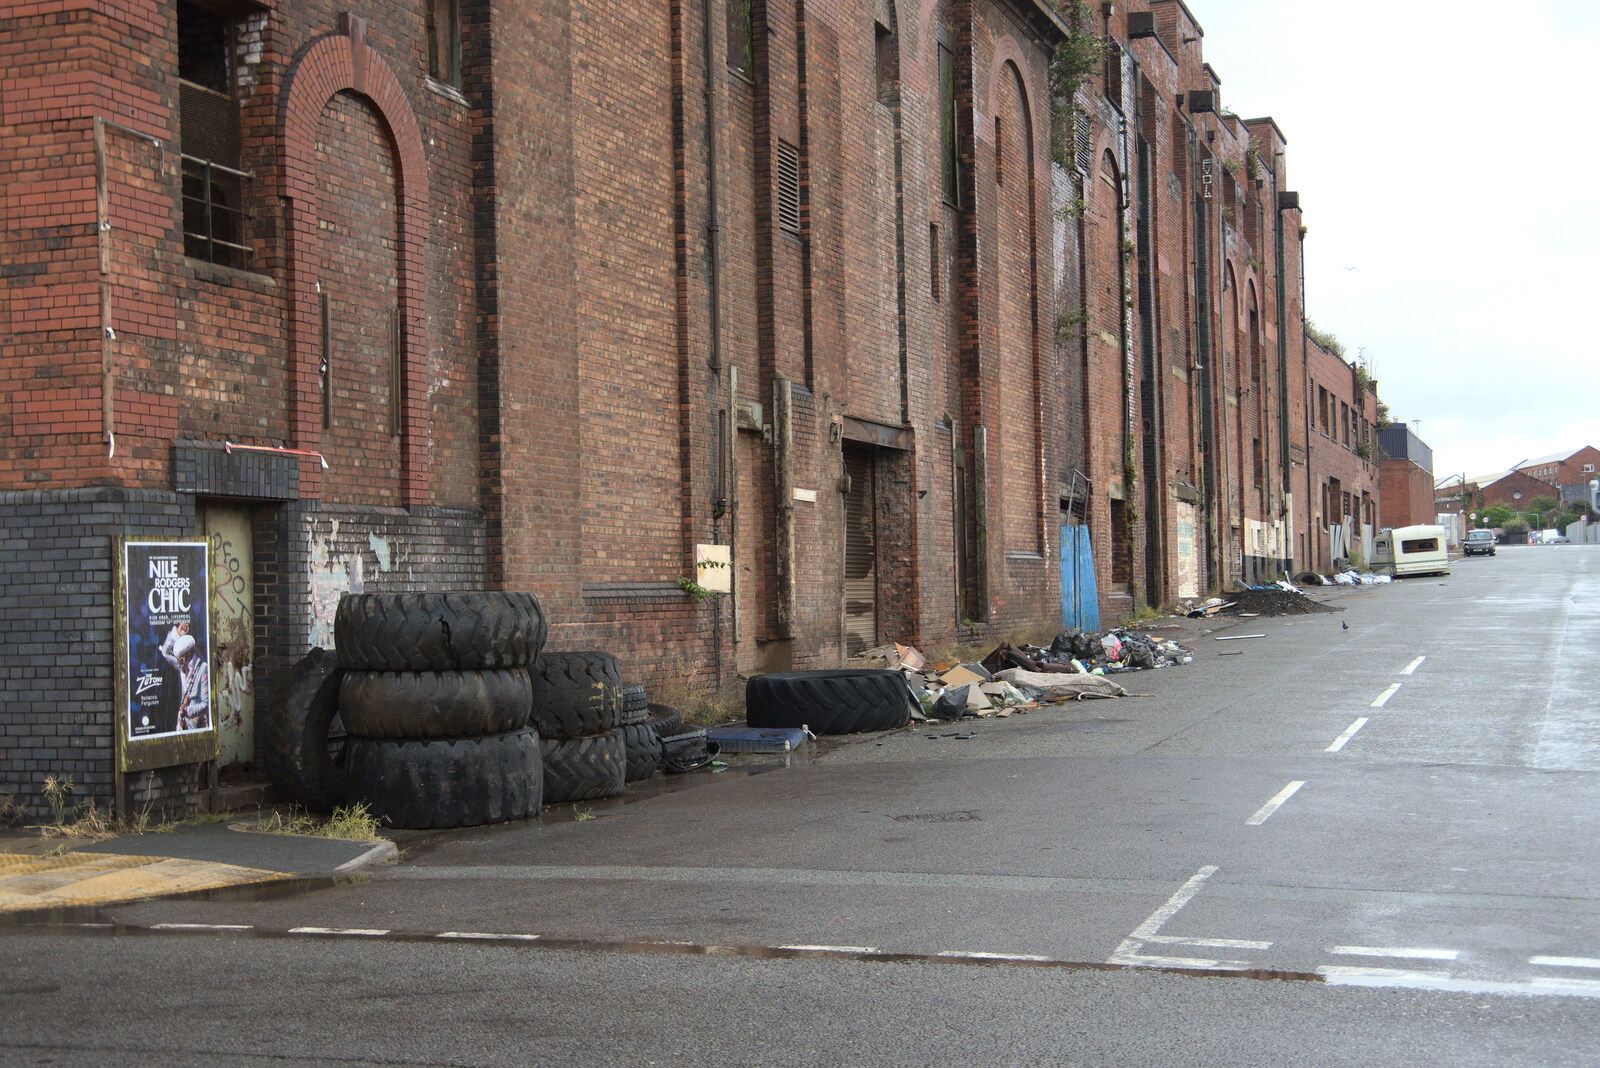 Discarded tyres, caravans and dereliction from Pork Pies and Dockside Dereliction, Melton Mowbray and Liverpool - 7th August 2021